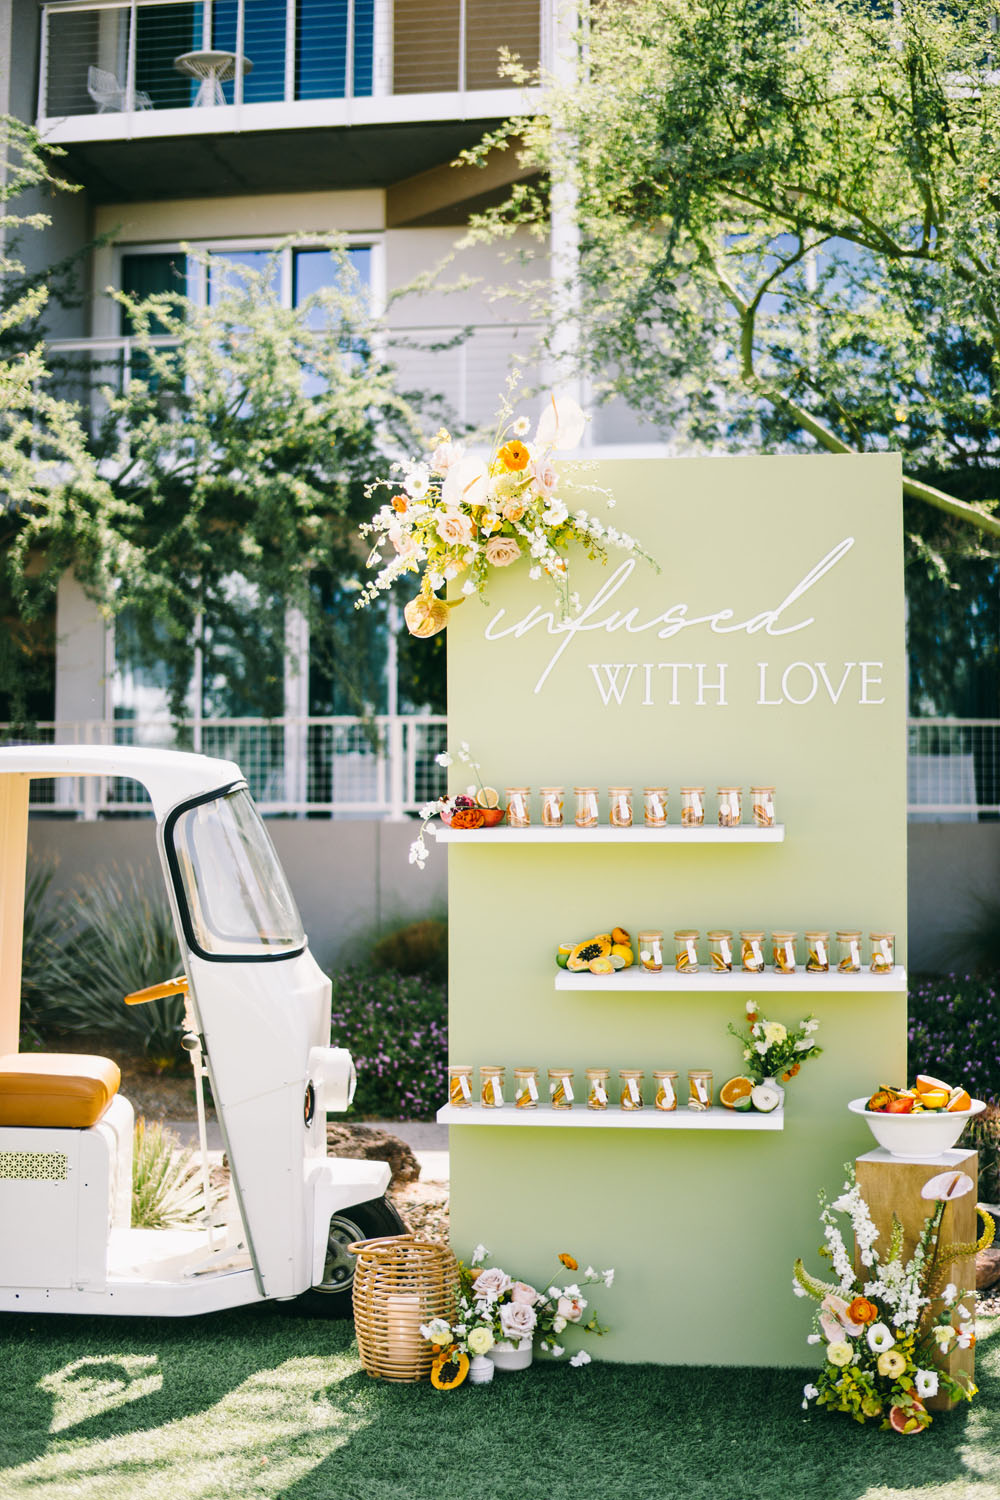 “Infused with Love” cocktail and citrus themed wedding ideas